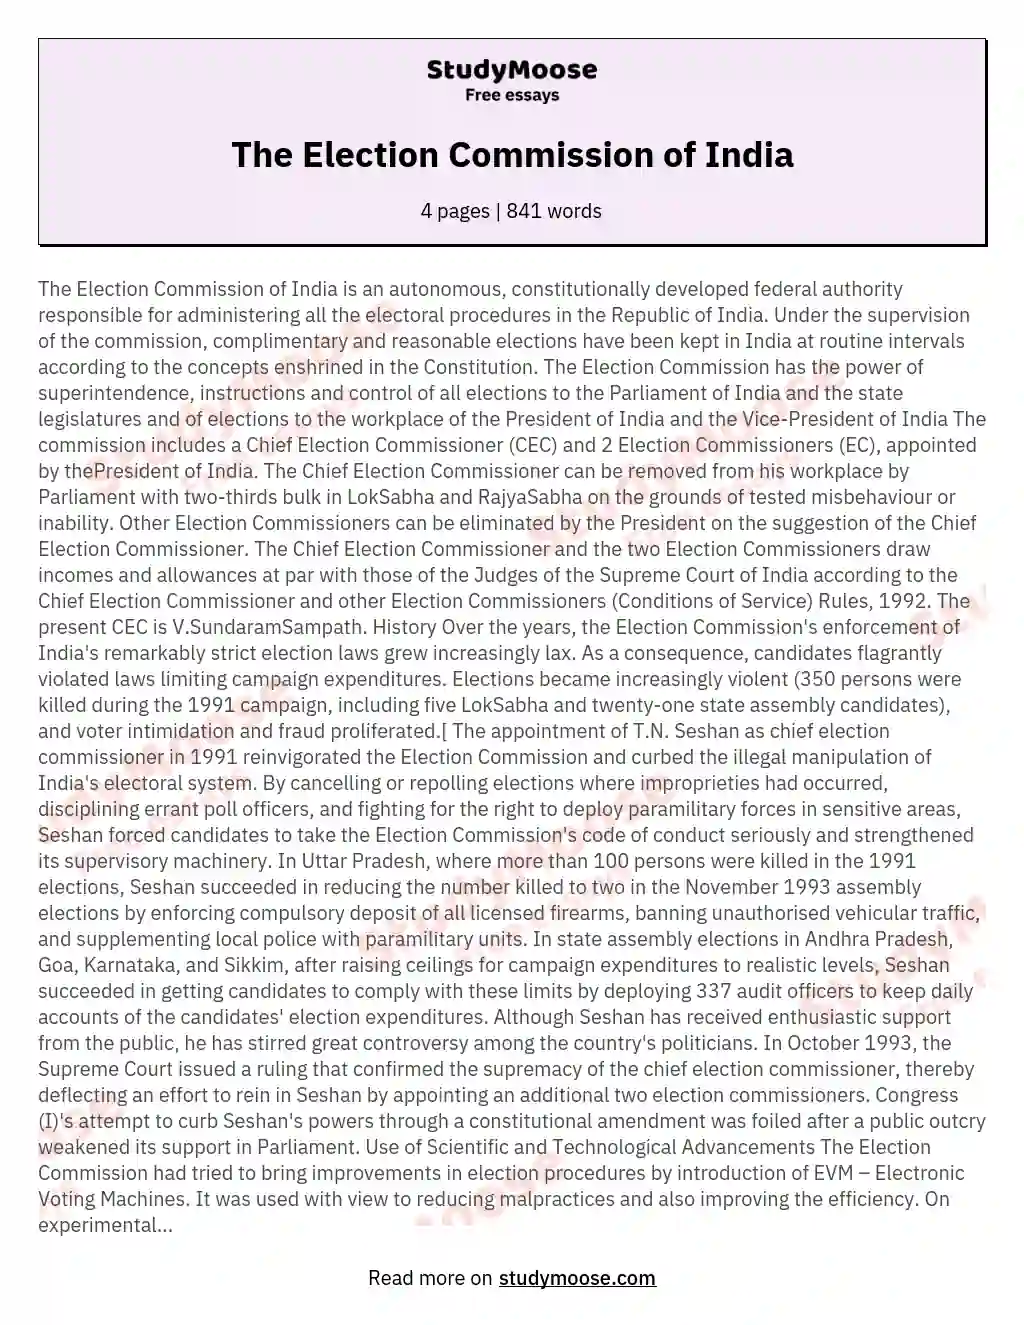 The Election Commission of India essay